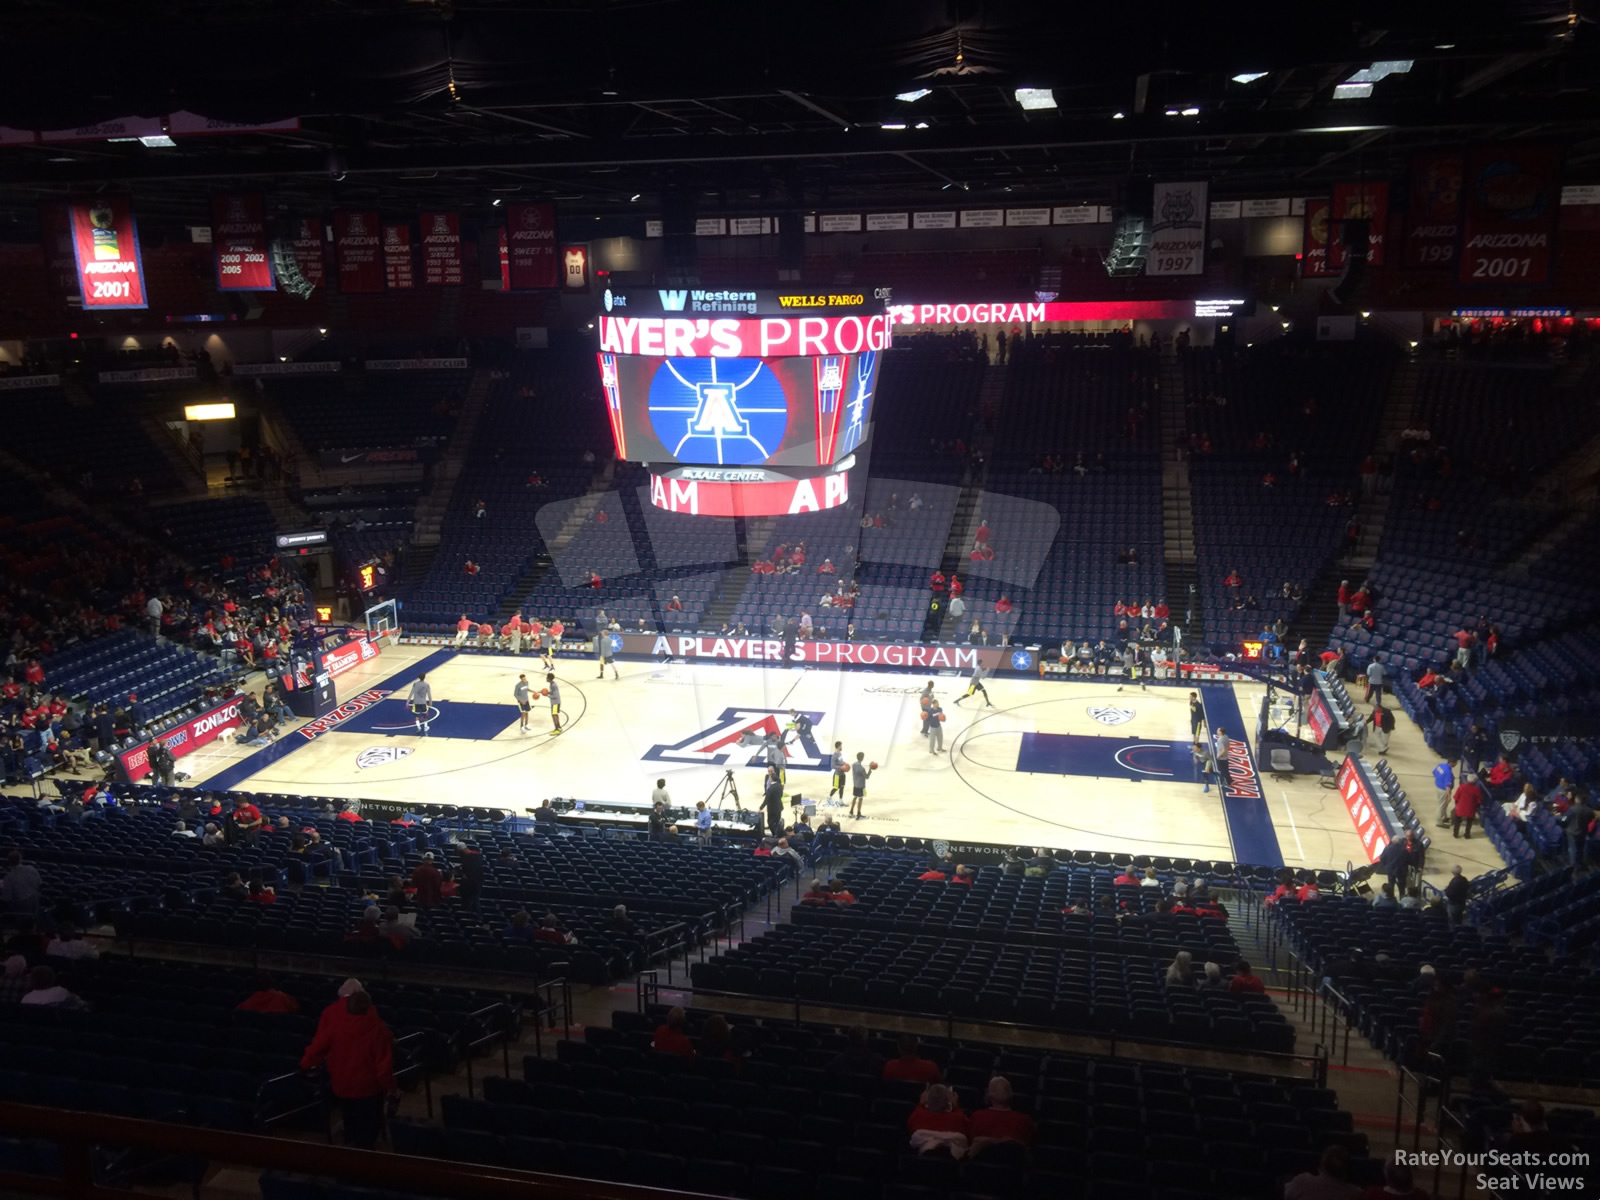 section 115a, row 35 seat view  - mckale center